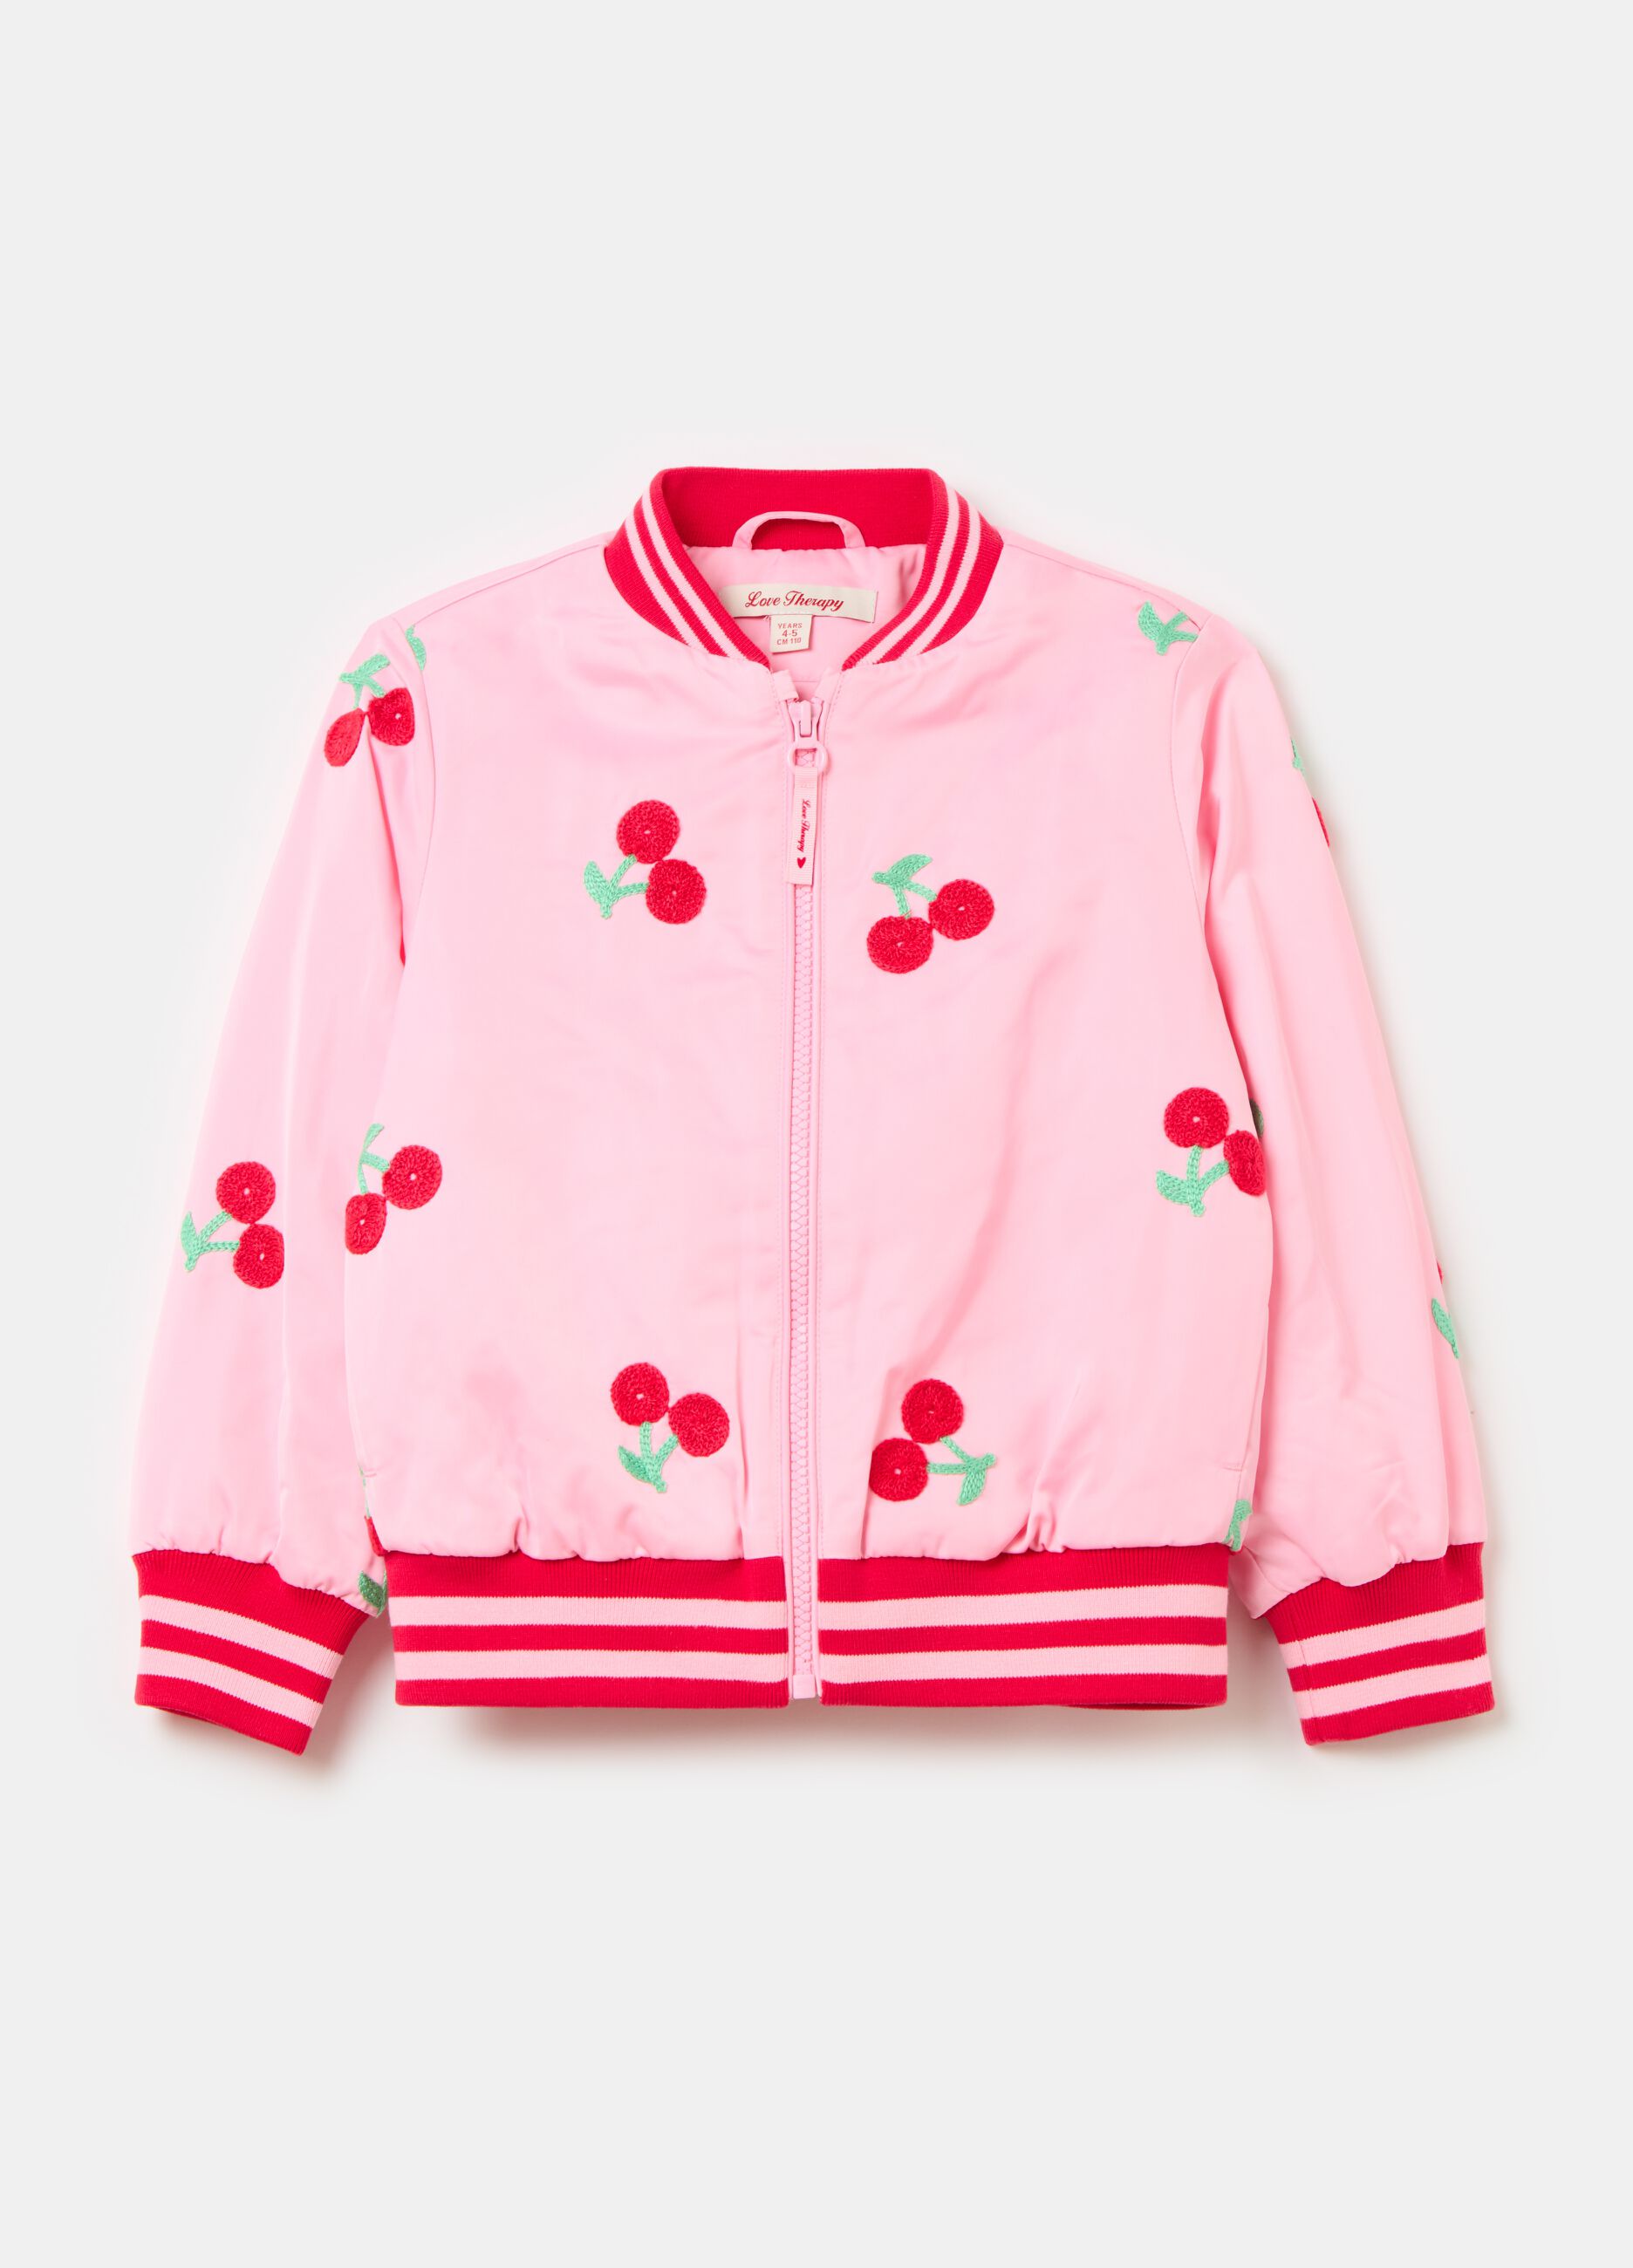 Bomber jacket with crochet cherries application